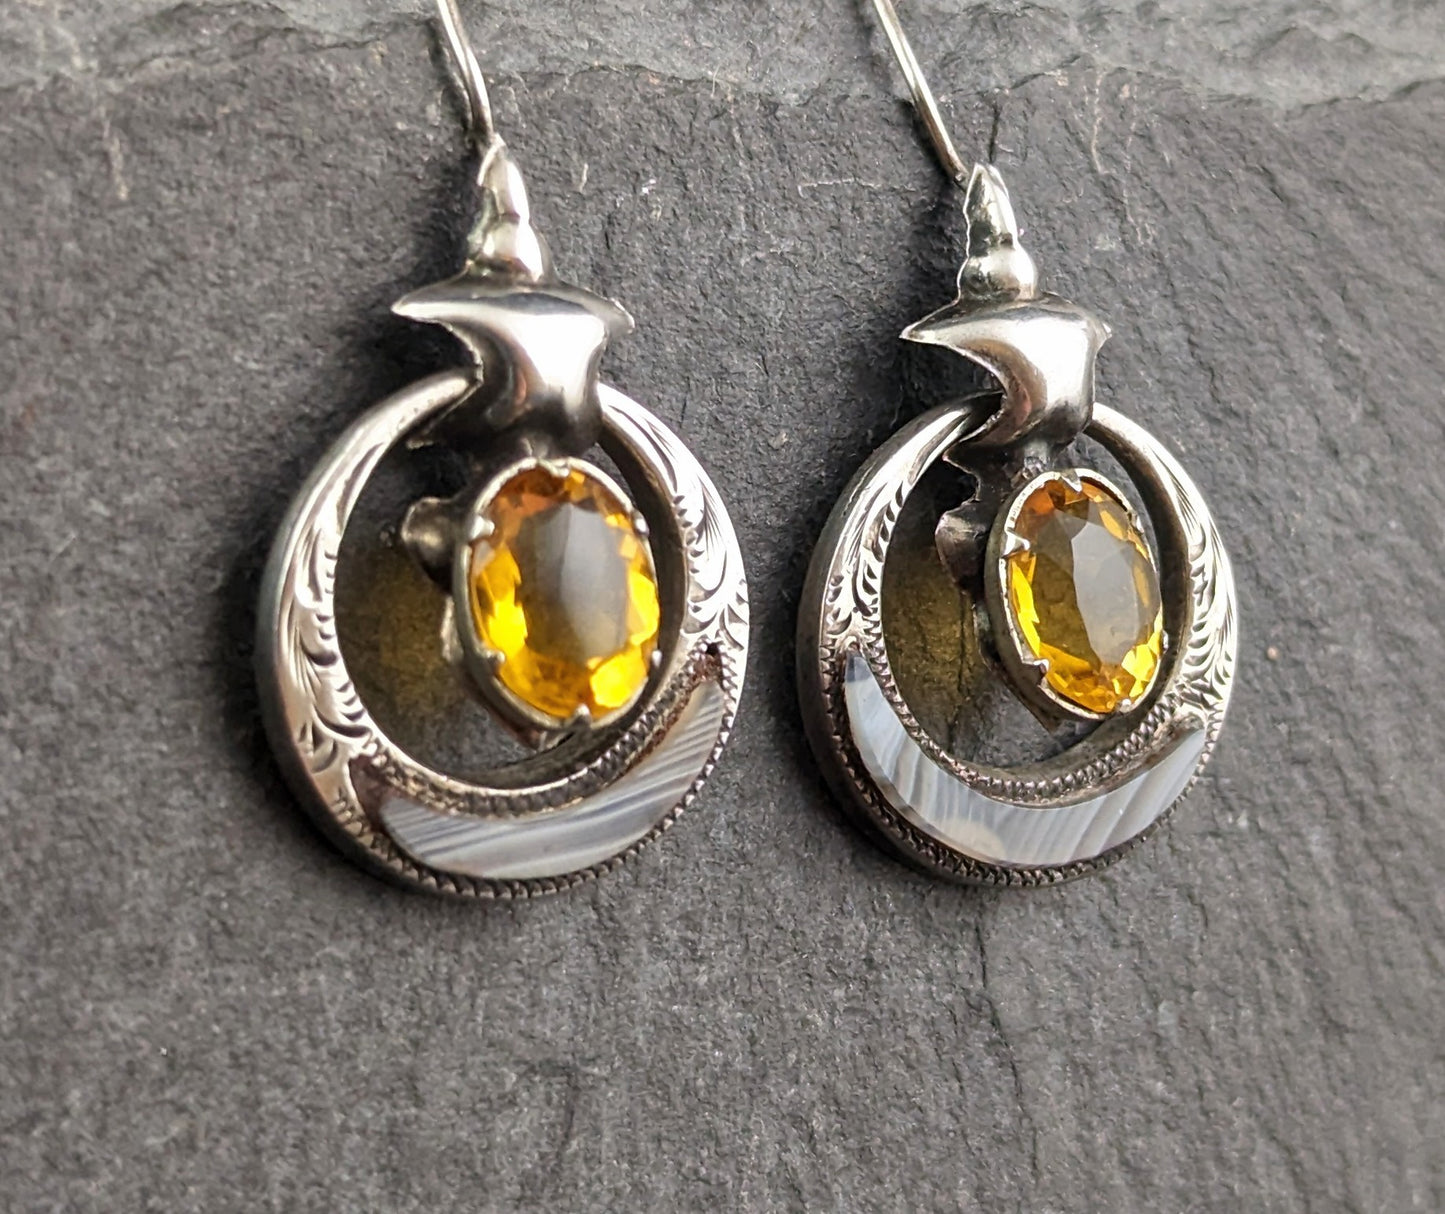 Antique Victorian Scottish agate drop earrings, Sterling silver